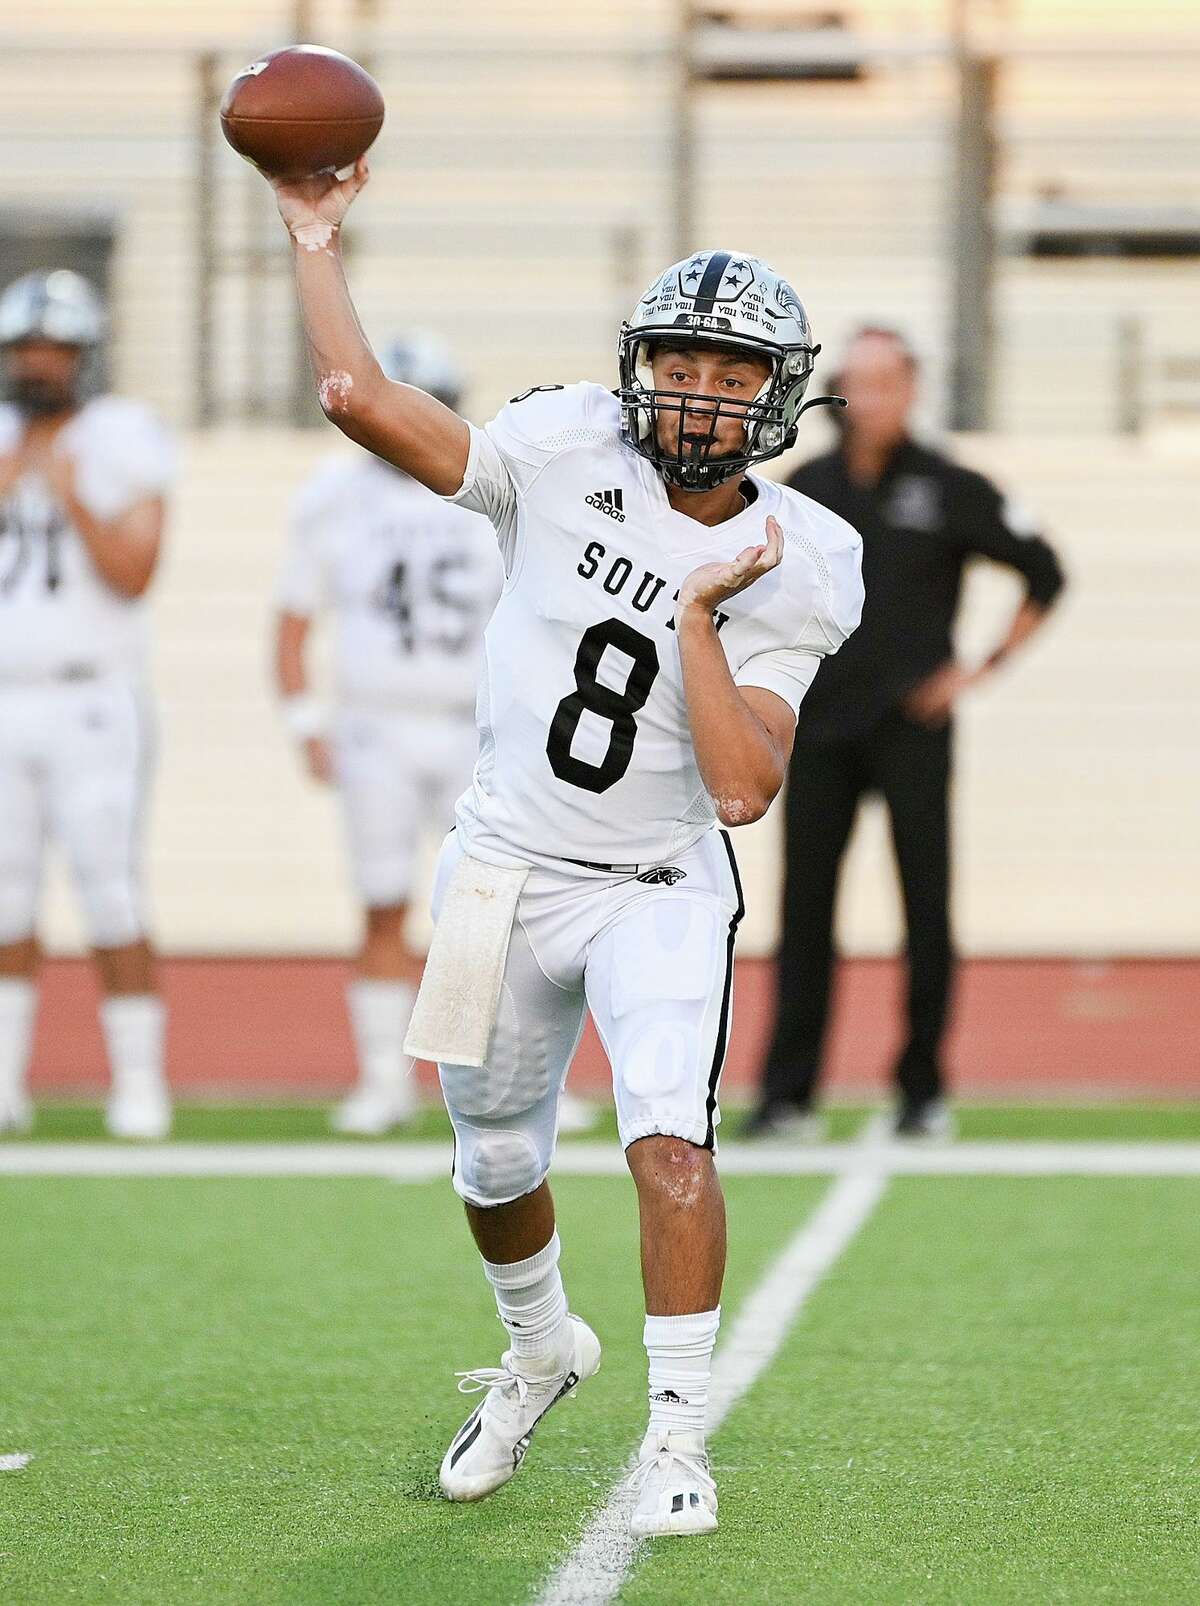 United South’s Luis Cisneros was selected as the District 30-6A’s Most Outstanding Quarterback this season.